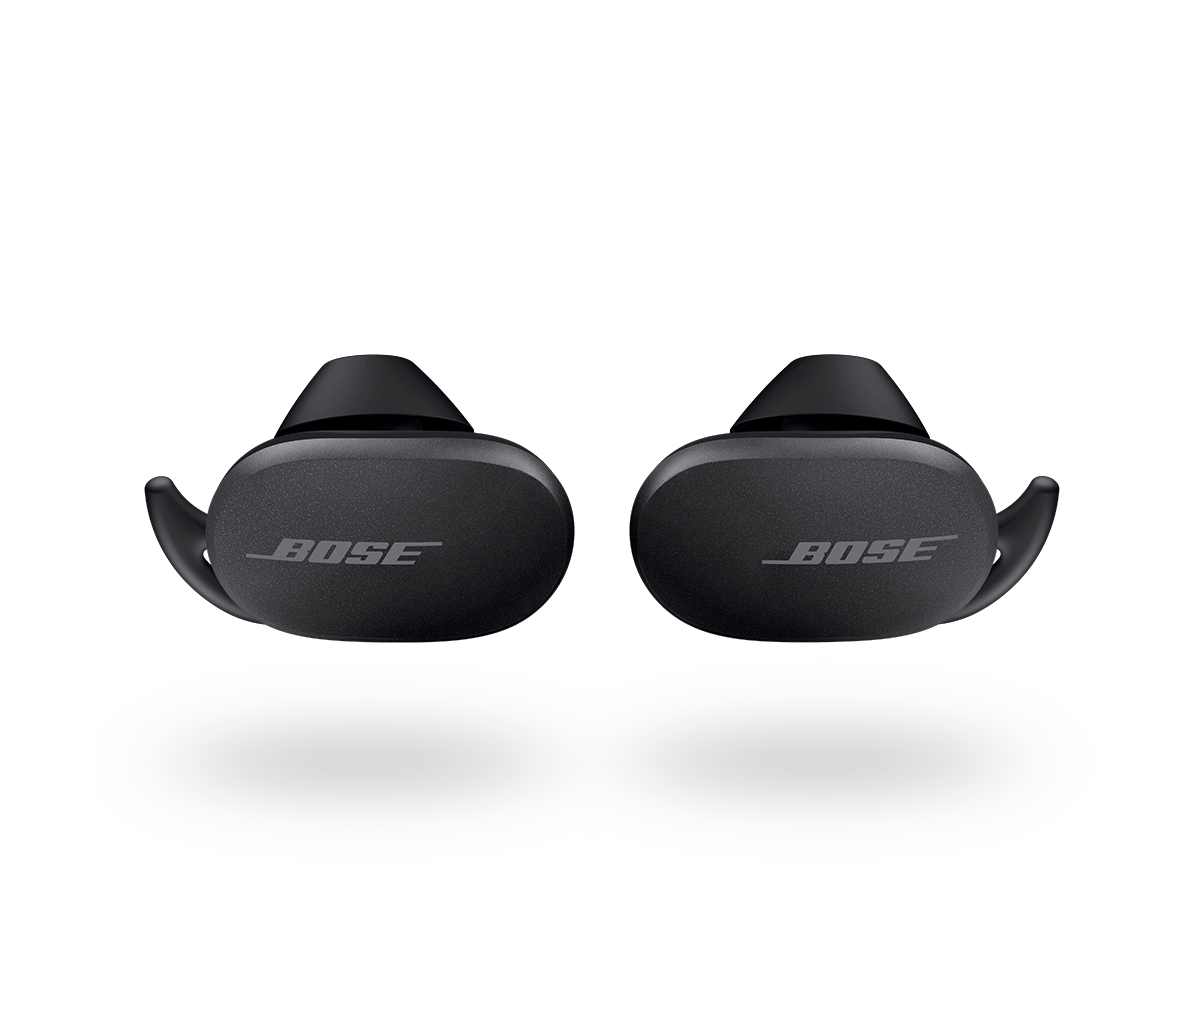 Bose Replace Noise Isolation Ears with Extract Layer Comfort Ears for Bose Ear T O5F1 194724636291 